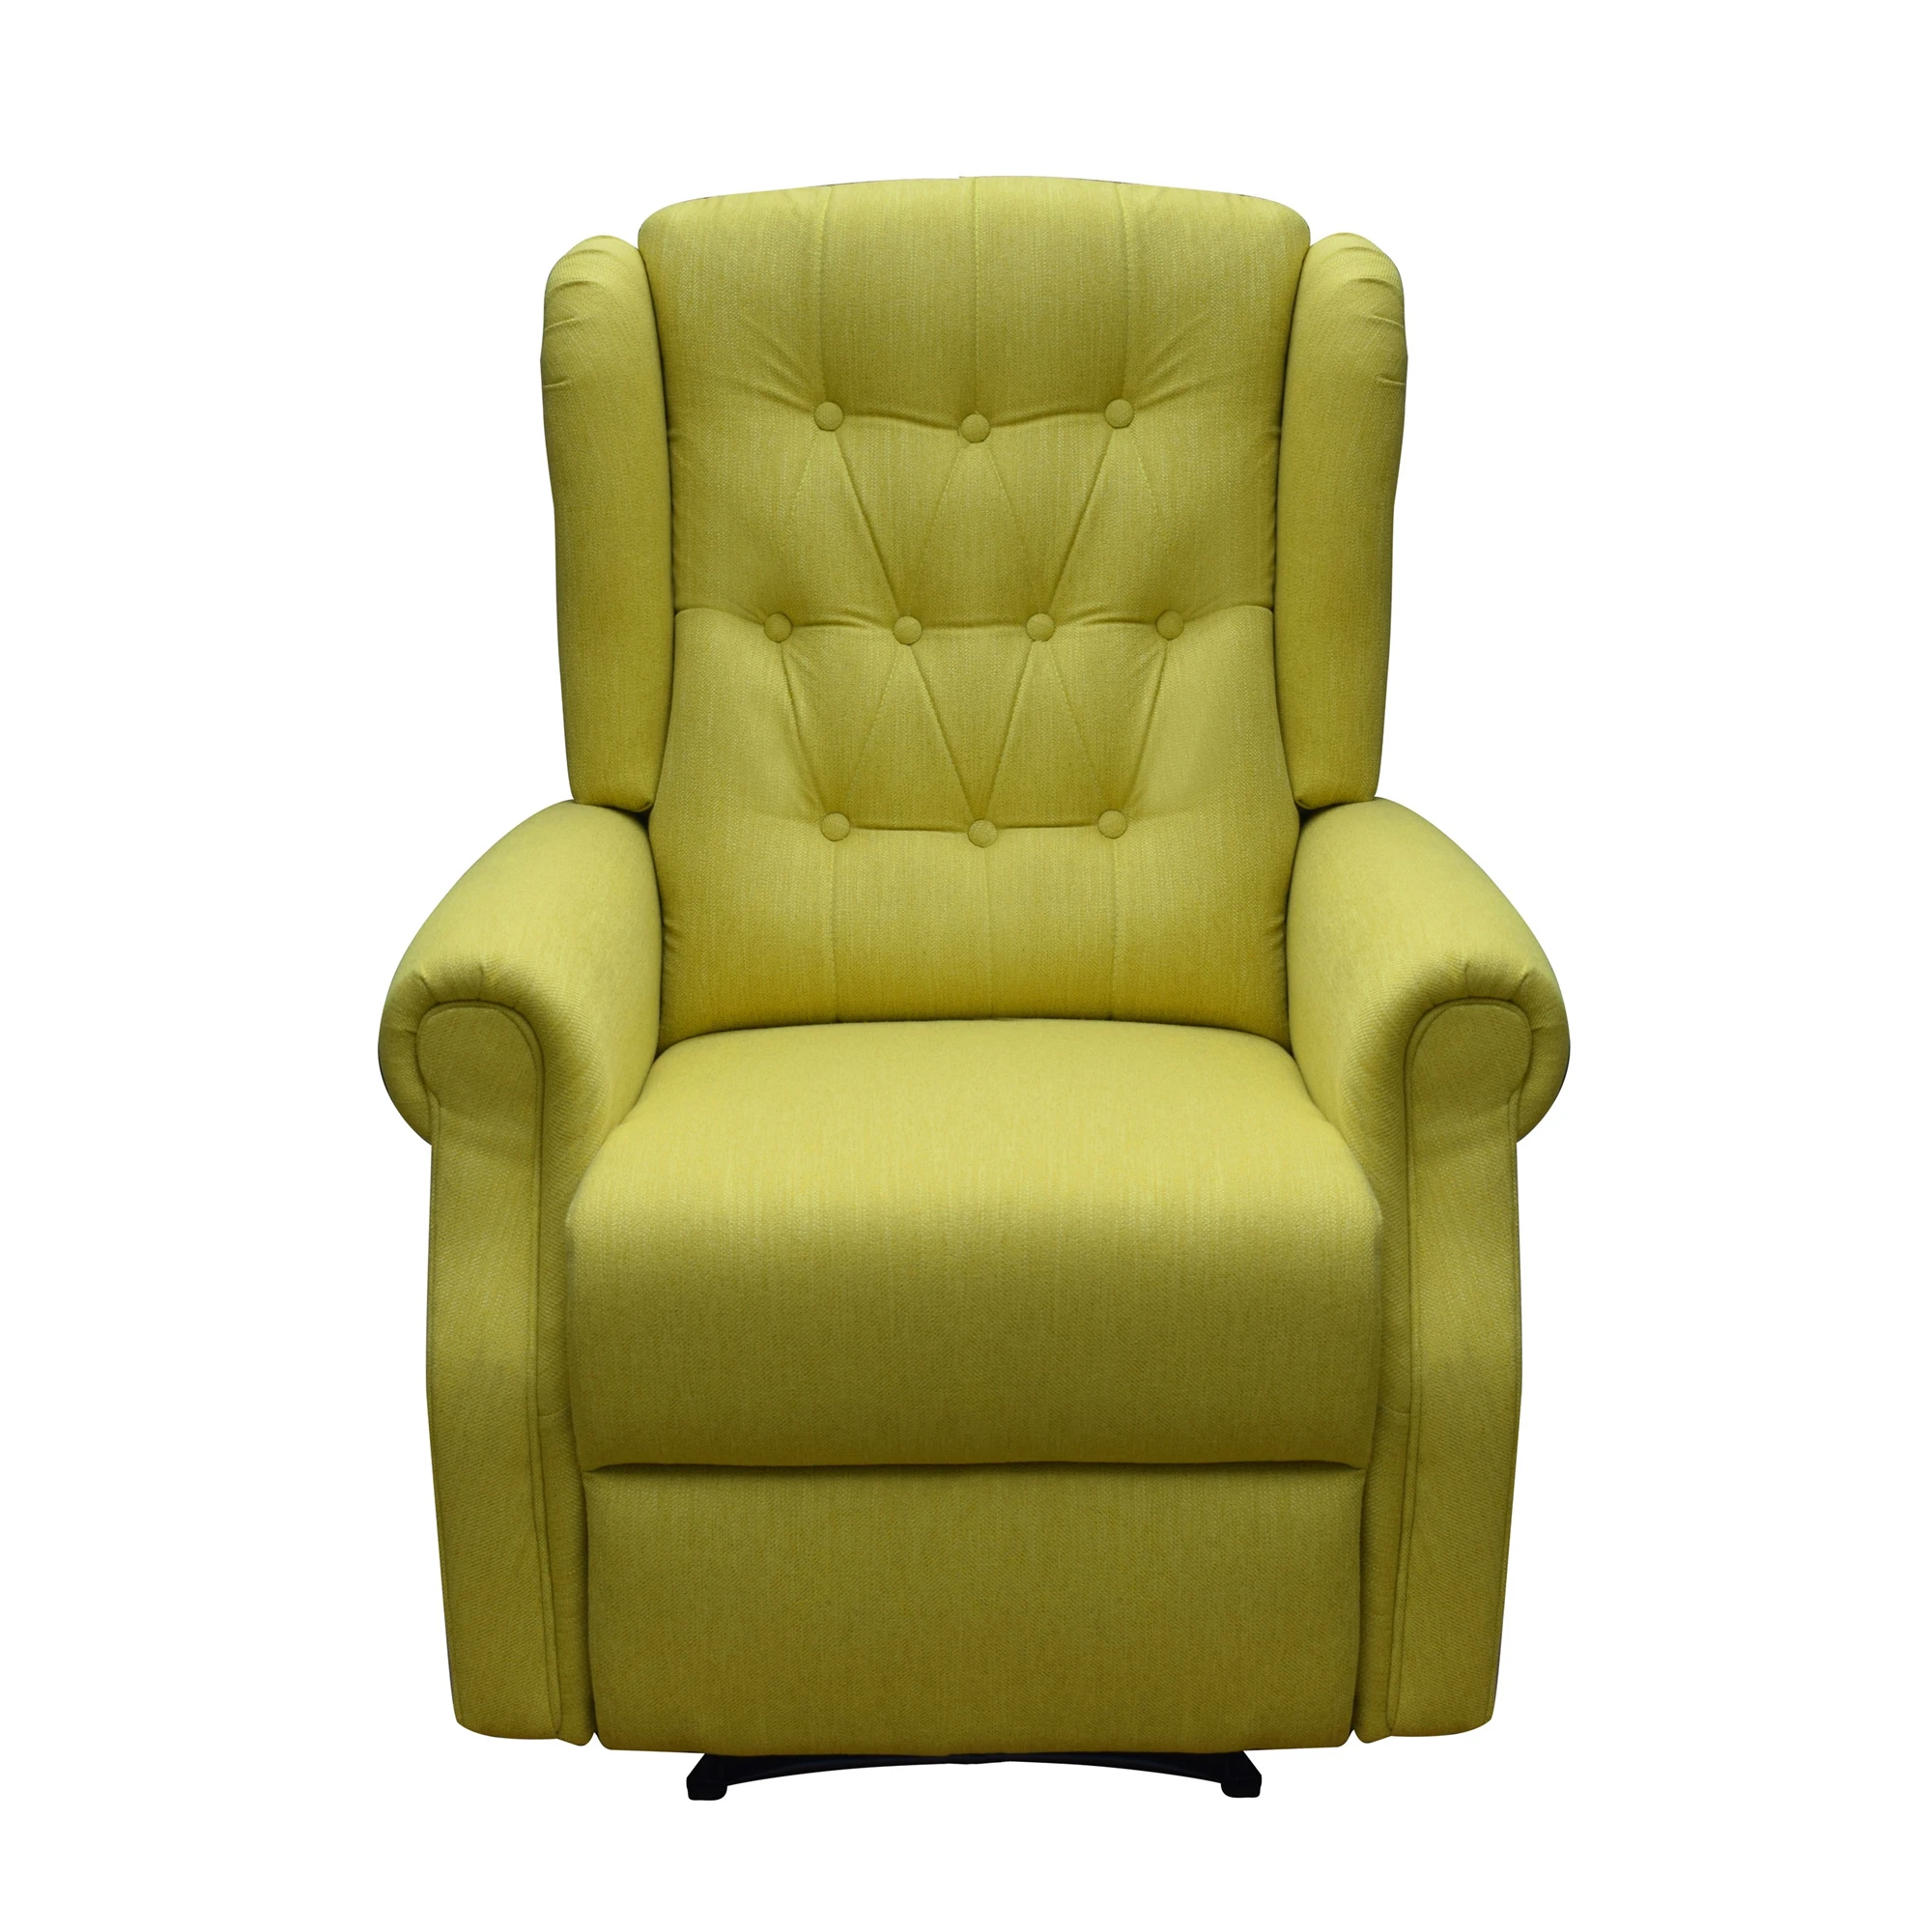 Jky Furniture Made In China Anji Eco Friendly Recliner Electric